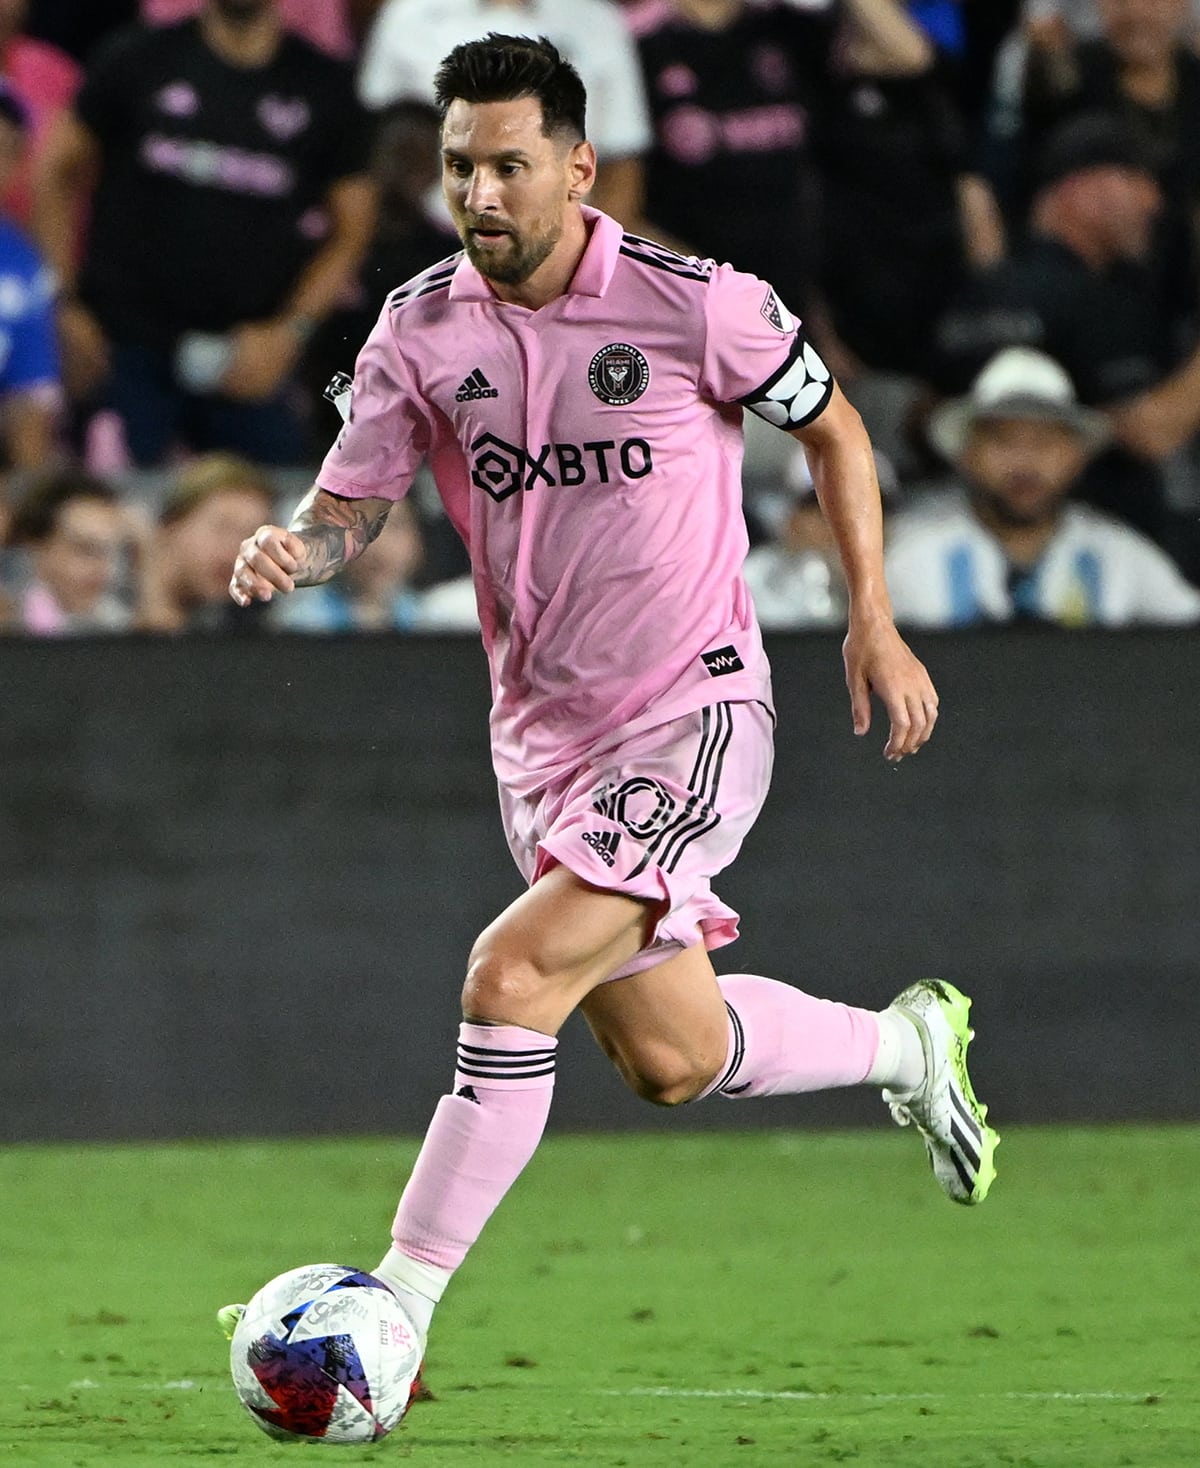 Lionel Messi scored a game-winning free kick goal in the 94th minute of his Inter Miami debut against Cruz Azul on July 22, 2023